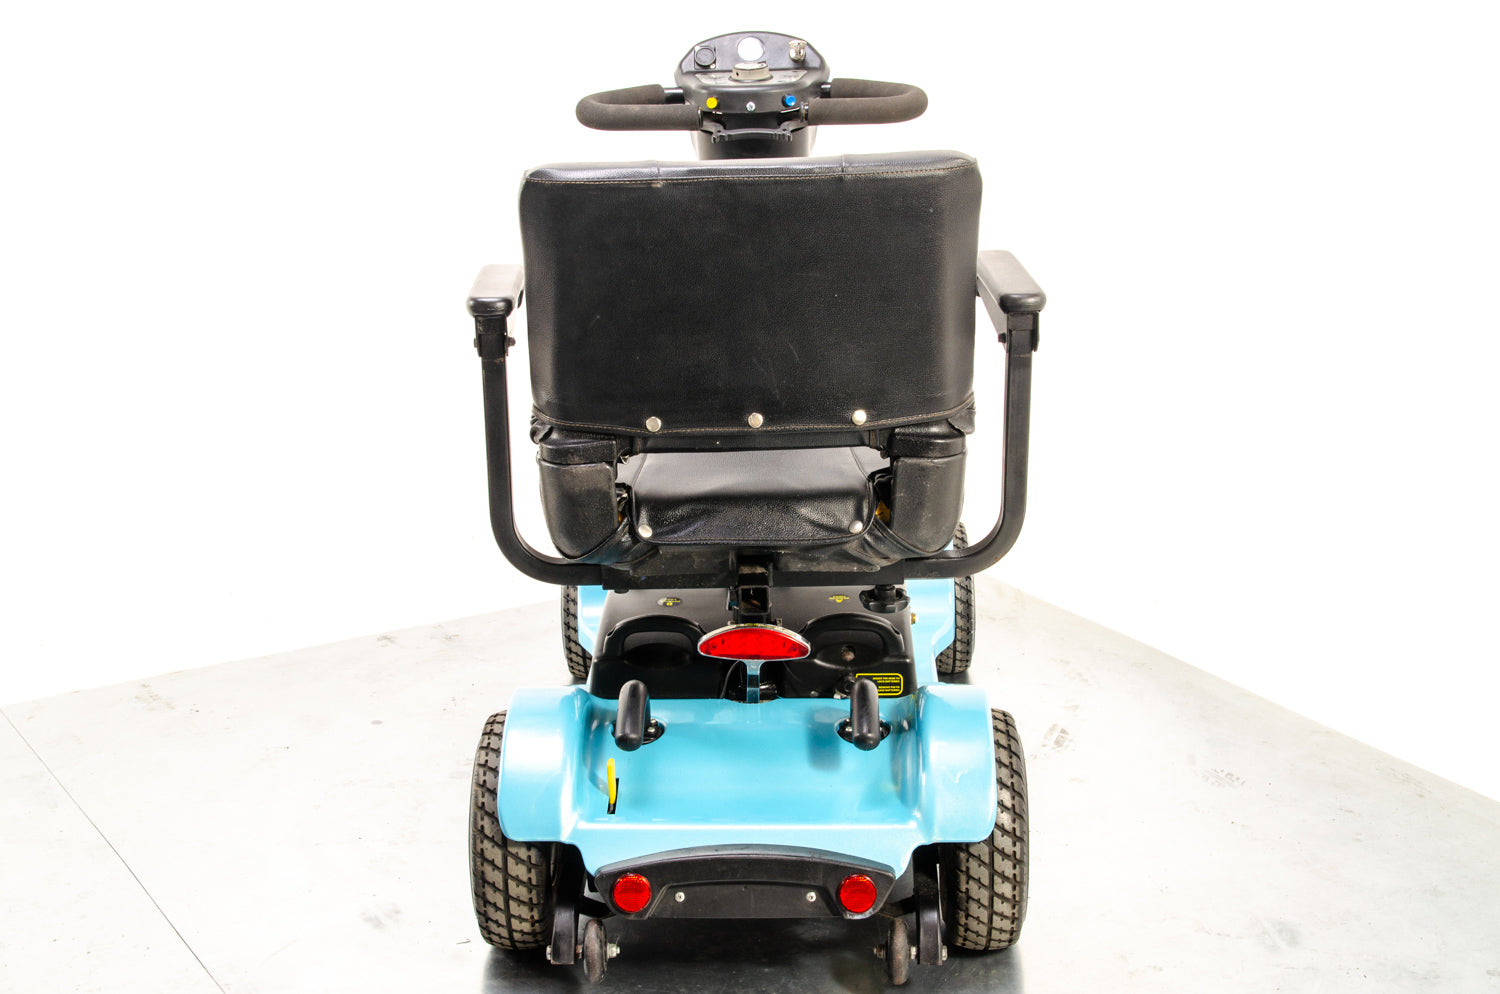 Sterling Sapphire 2 Mobility Scooter Midsize Transportable Pneumatic Tyres Folding Boot Pearl Blue 13642